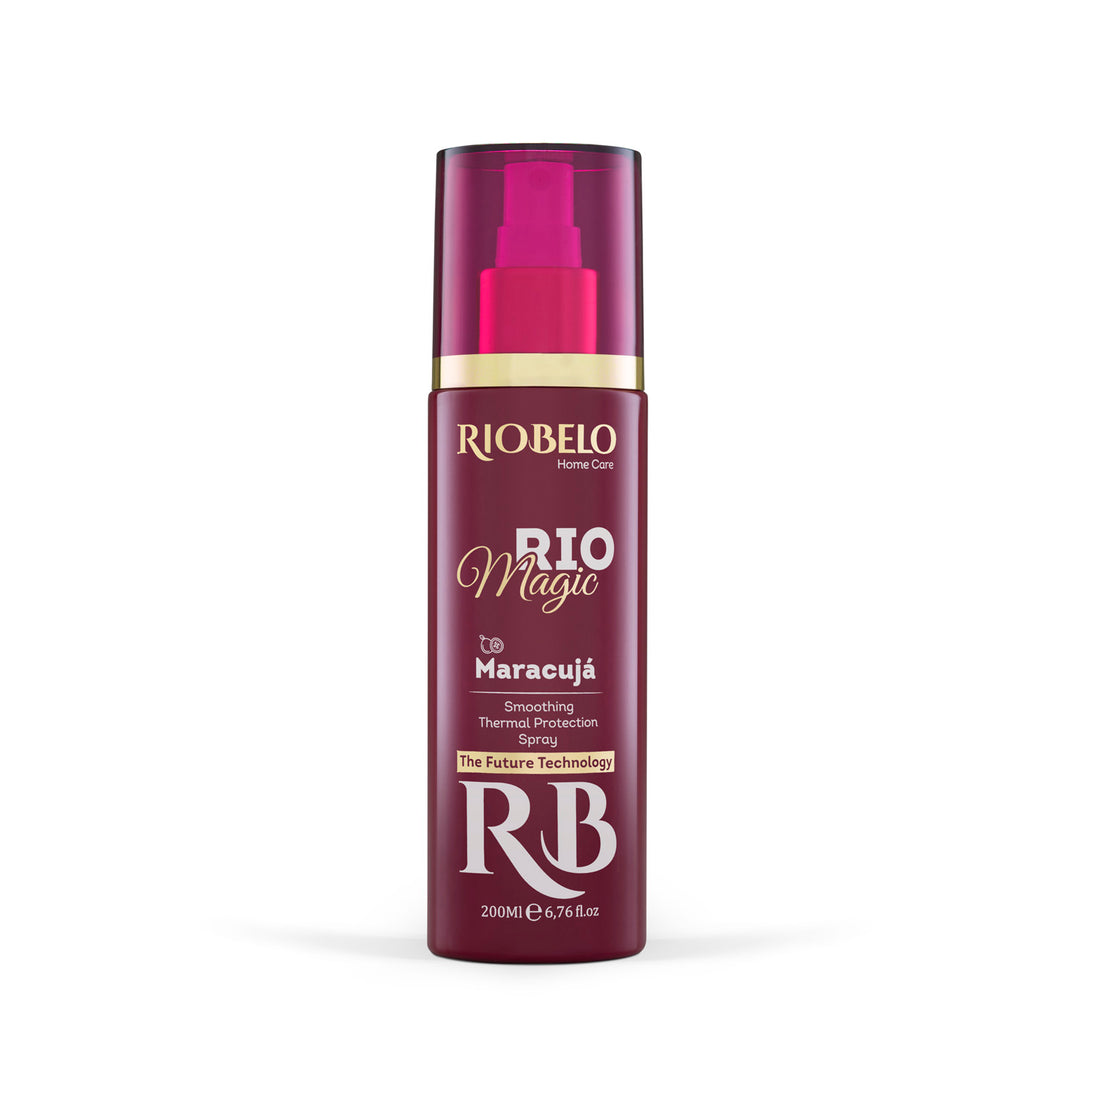 MARACUJÁ Smoothing Thermal Protection Spray For Normal and Curly Hair Rio Magic - 200ml